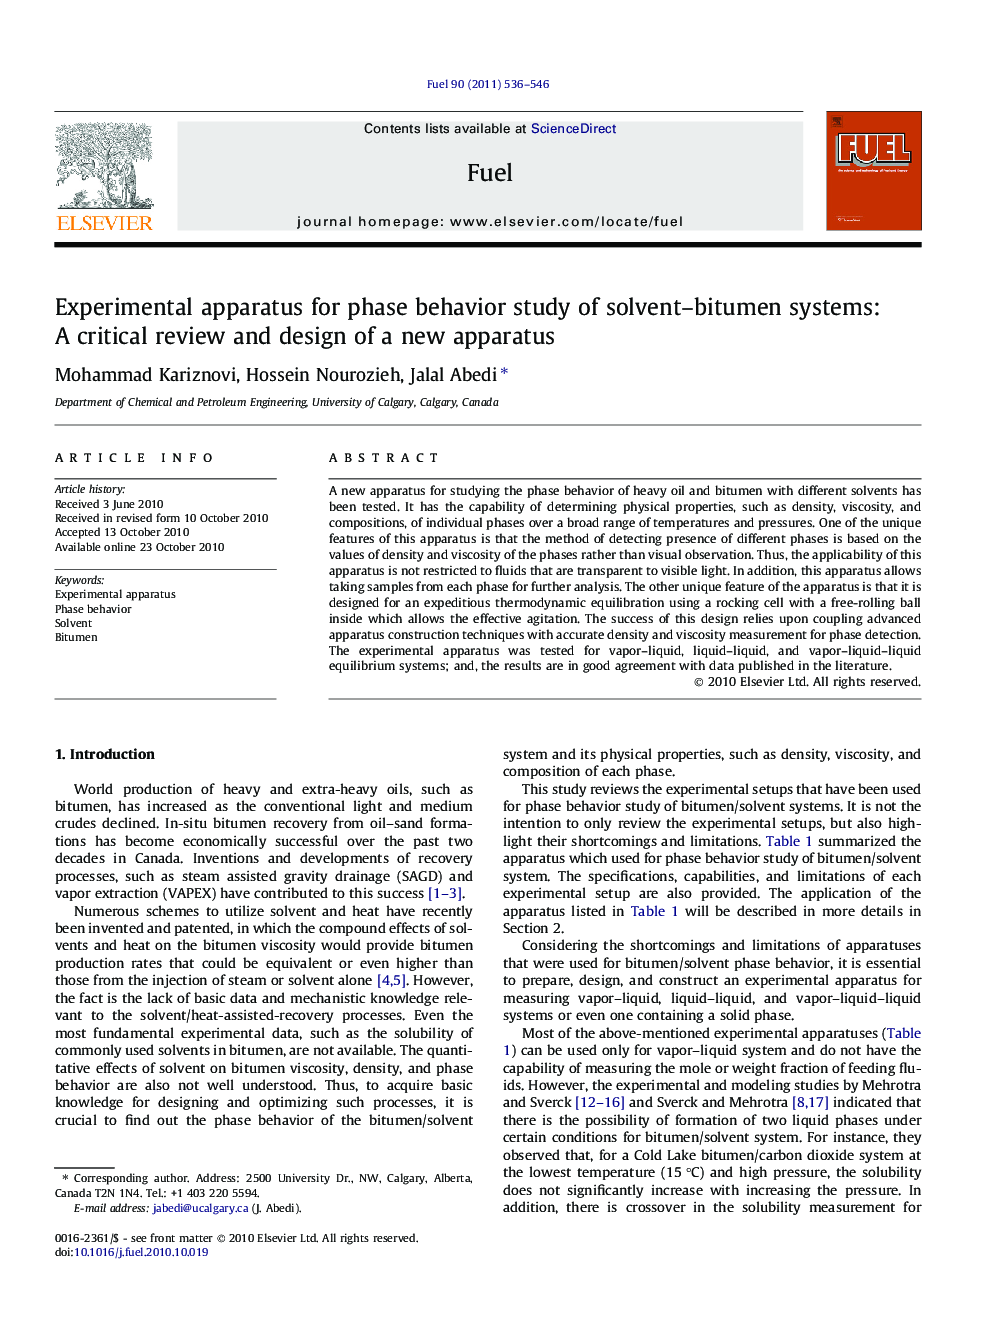 Experimental apparatus for phase behavior study of solvent–bitumen systems: A critical review and design of a new apparatus